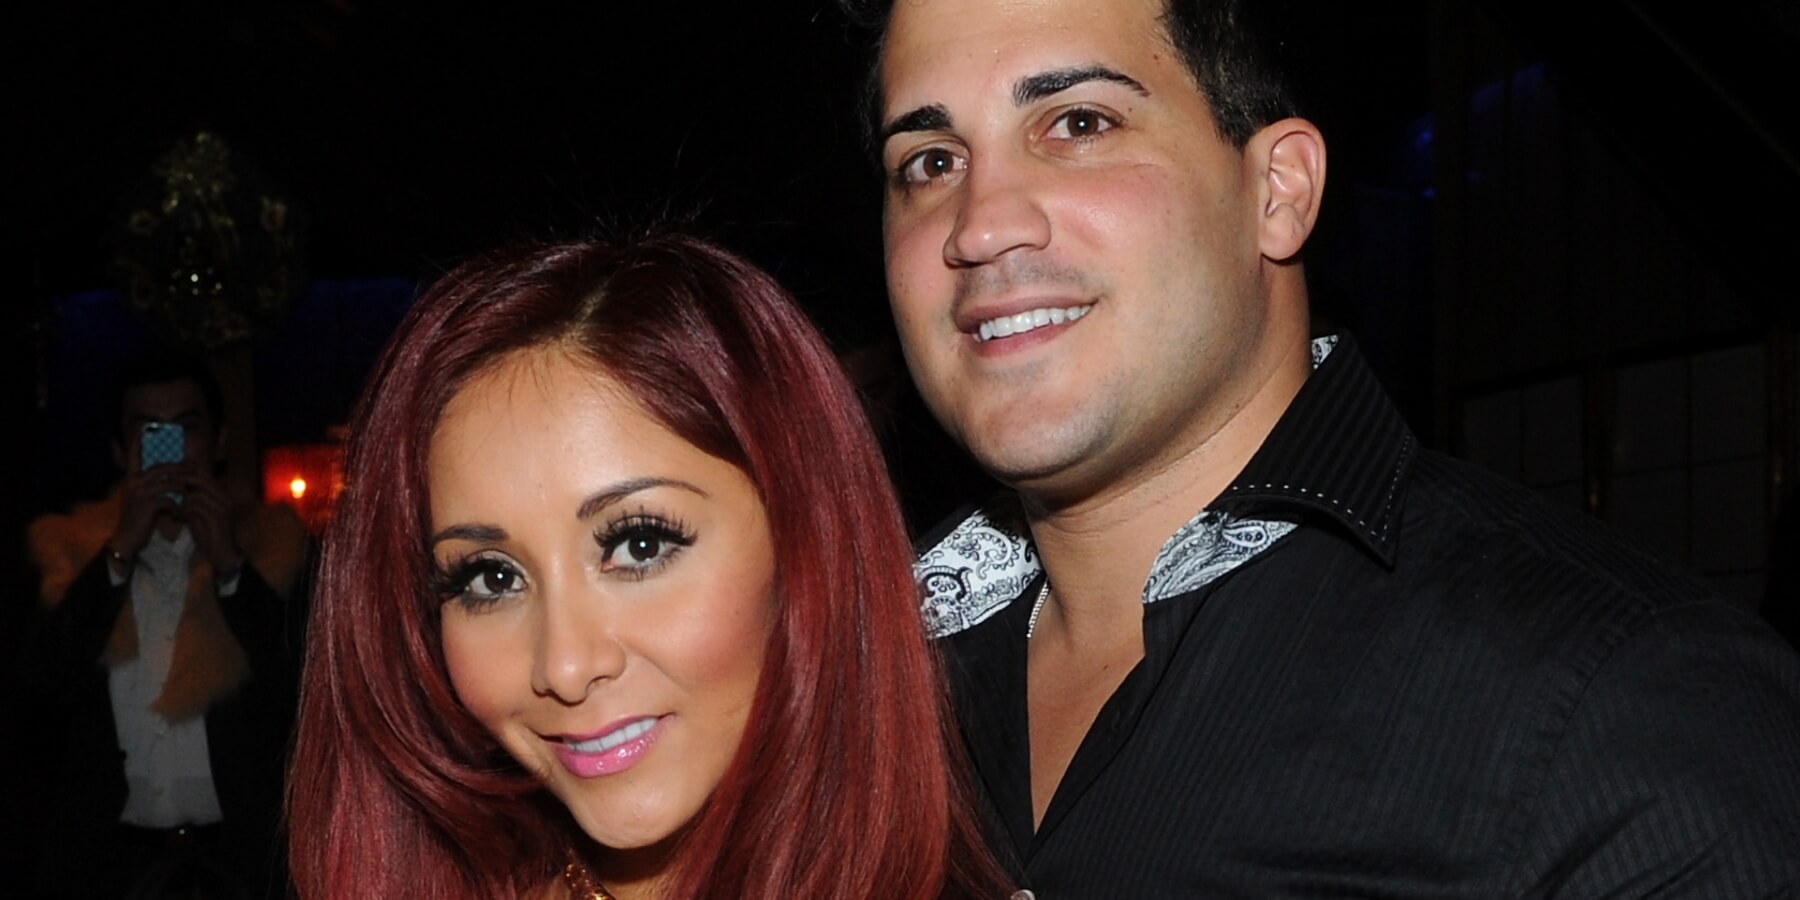 Nicole Polizzi and Jionni LaValle photographed together in 2013.